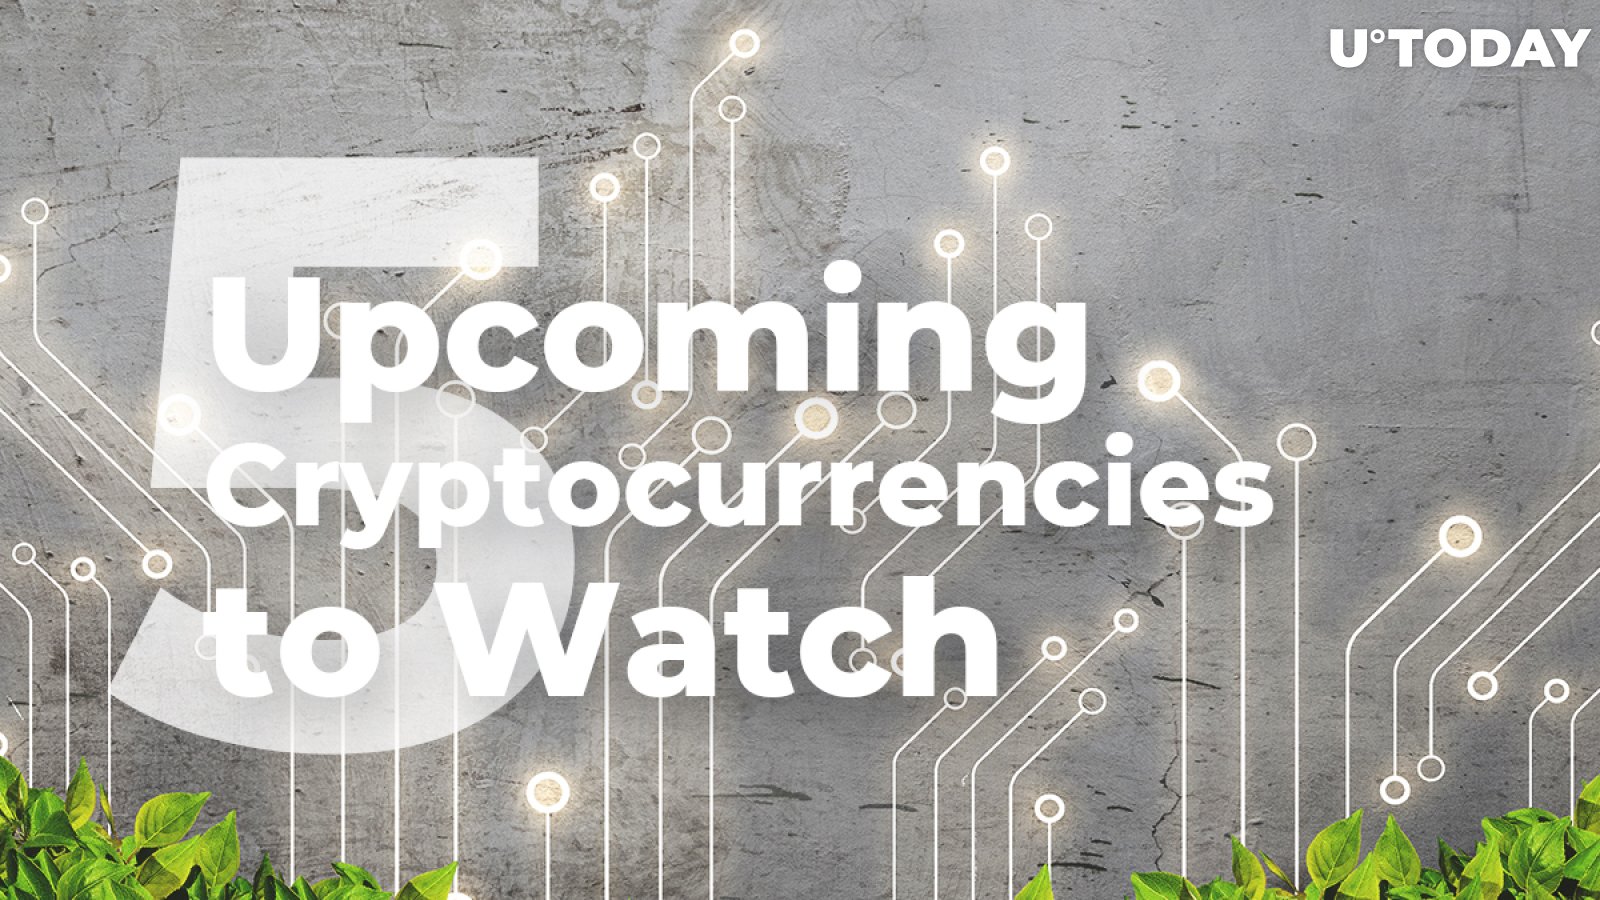 5 Popular Upcoming Cryptocurrencies to Watch in 2019 - Updated